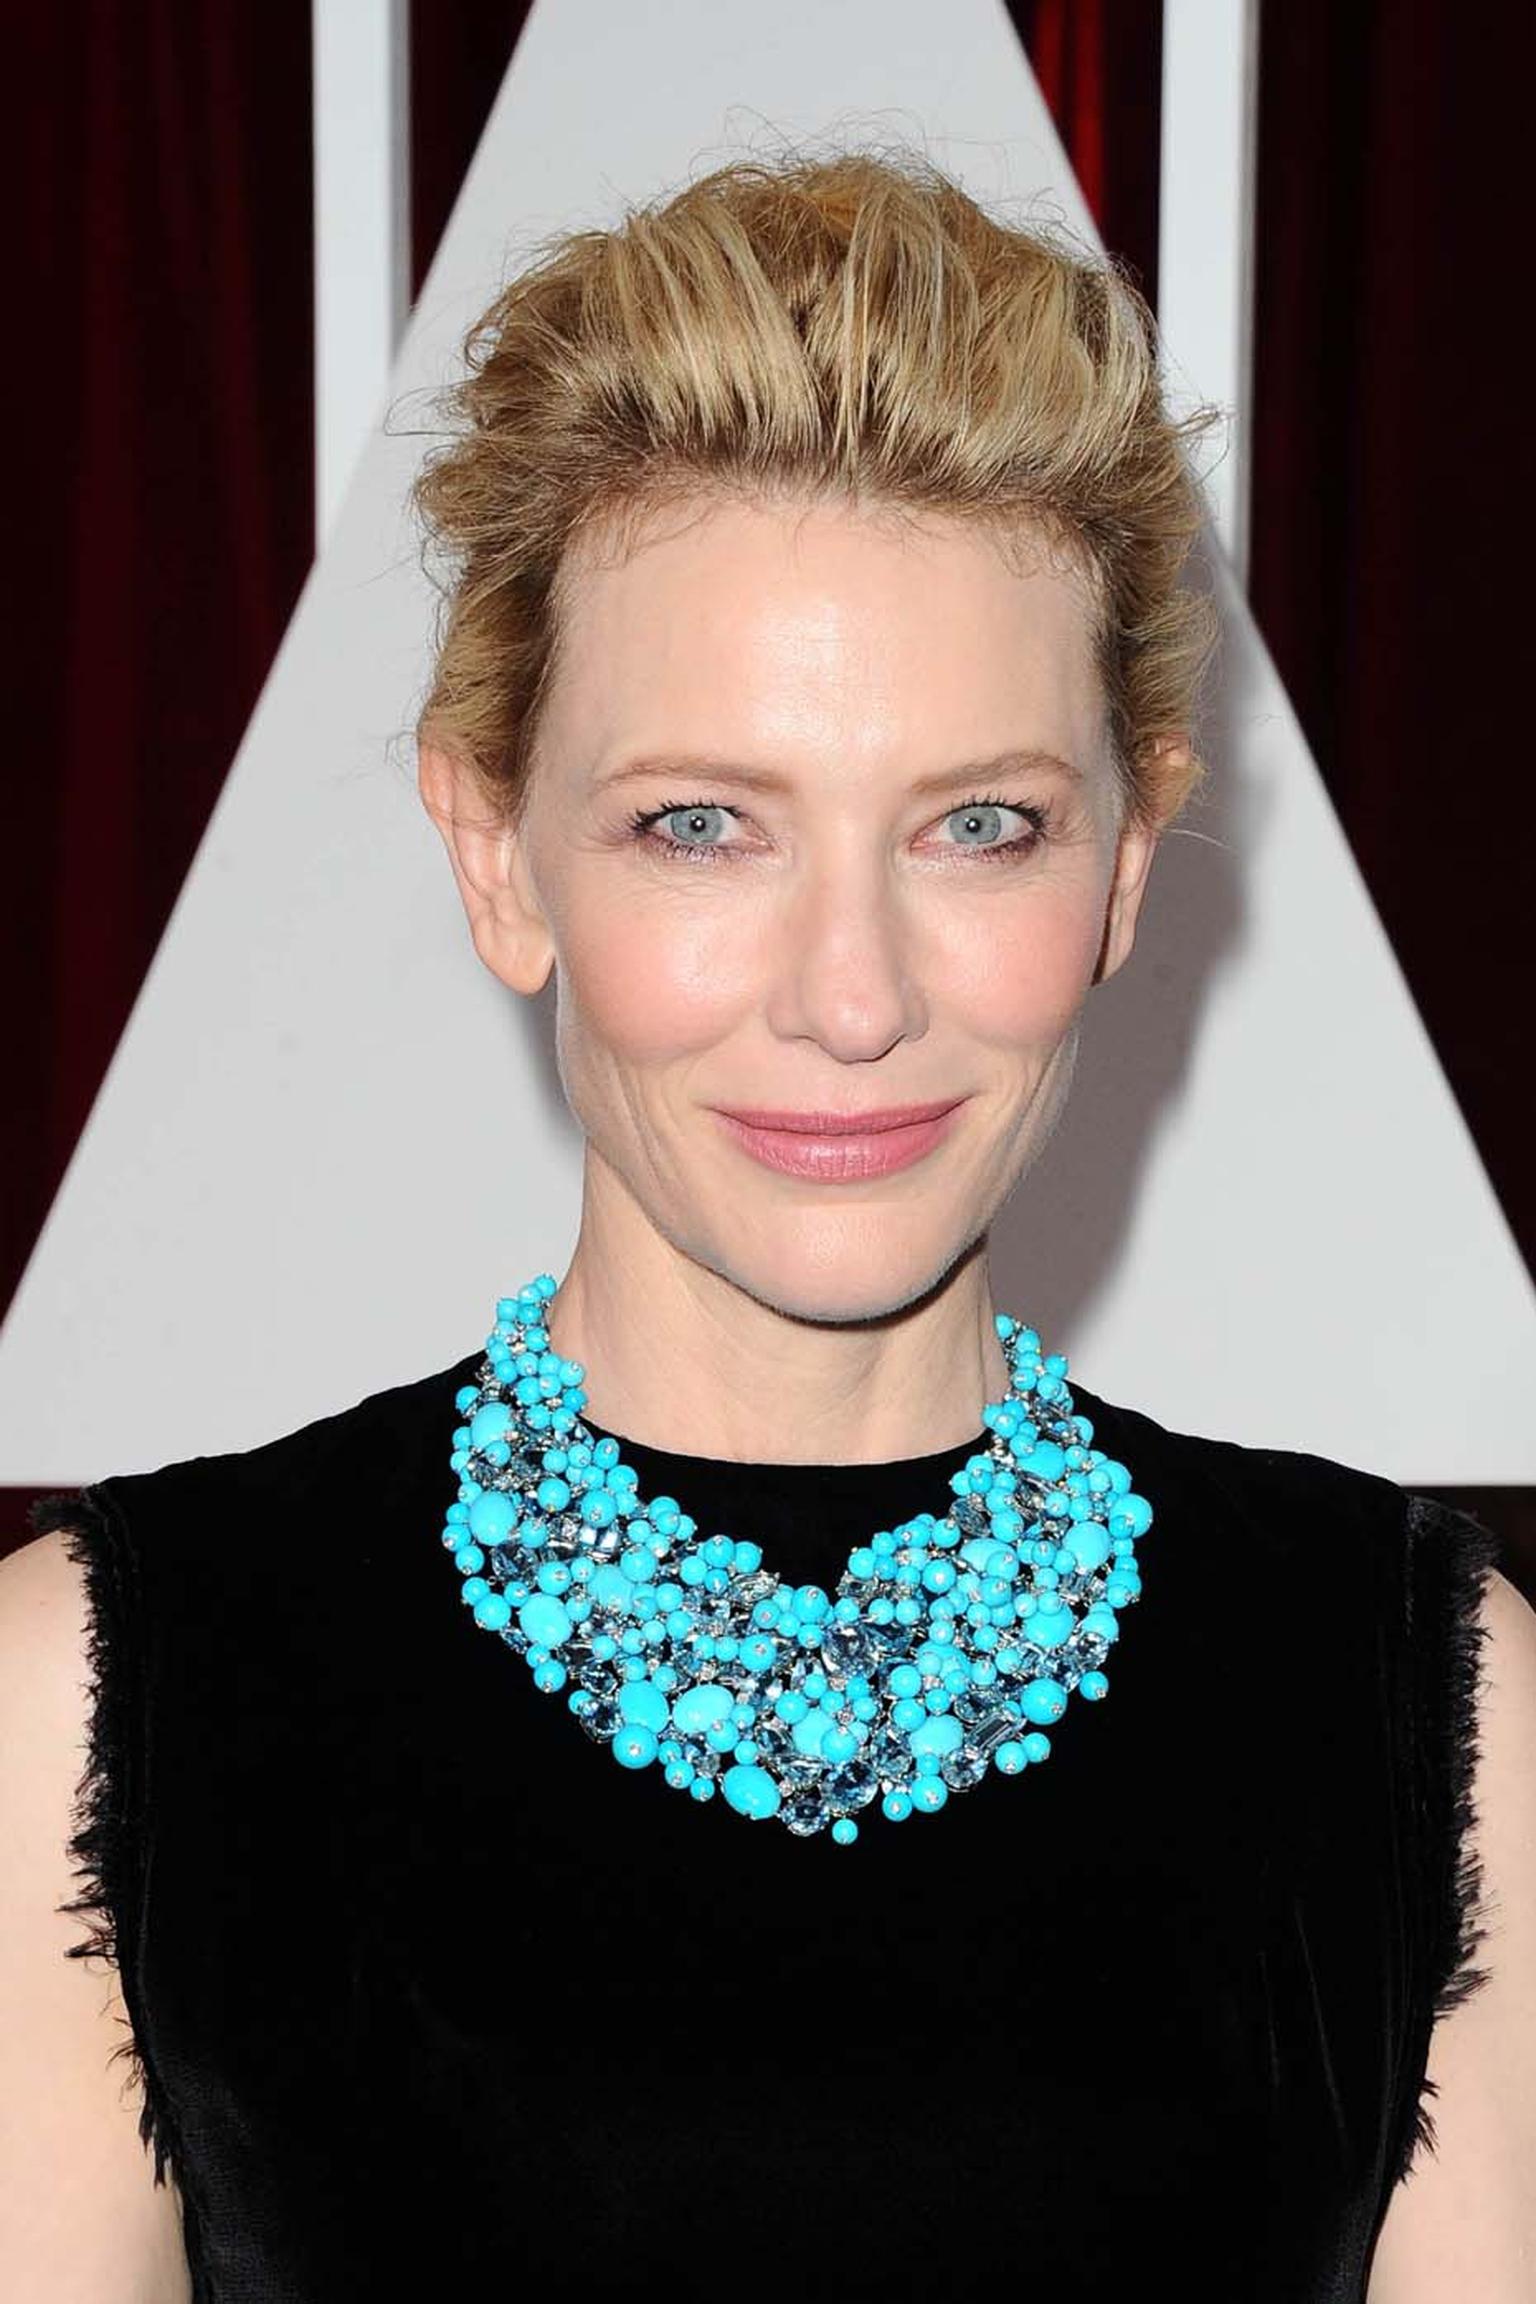 Actress Cate Blanchett's red carpet jewelry made one of the biggest statements of the night. She teamed her black Maison Margiela Couture gown with an outsized Tiffany bib of turquoise, aquamarine and diamonds.